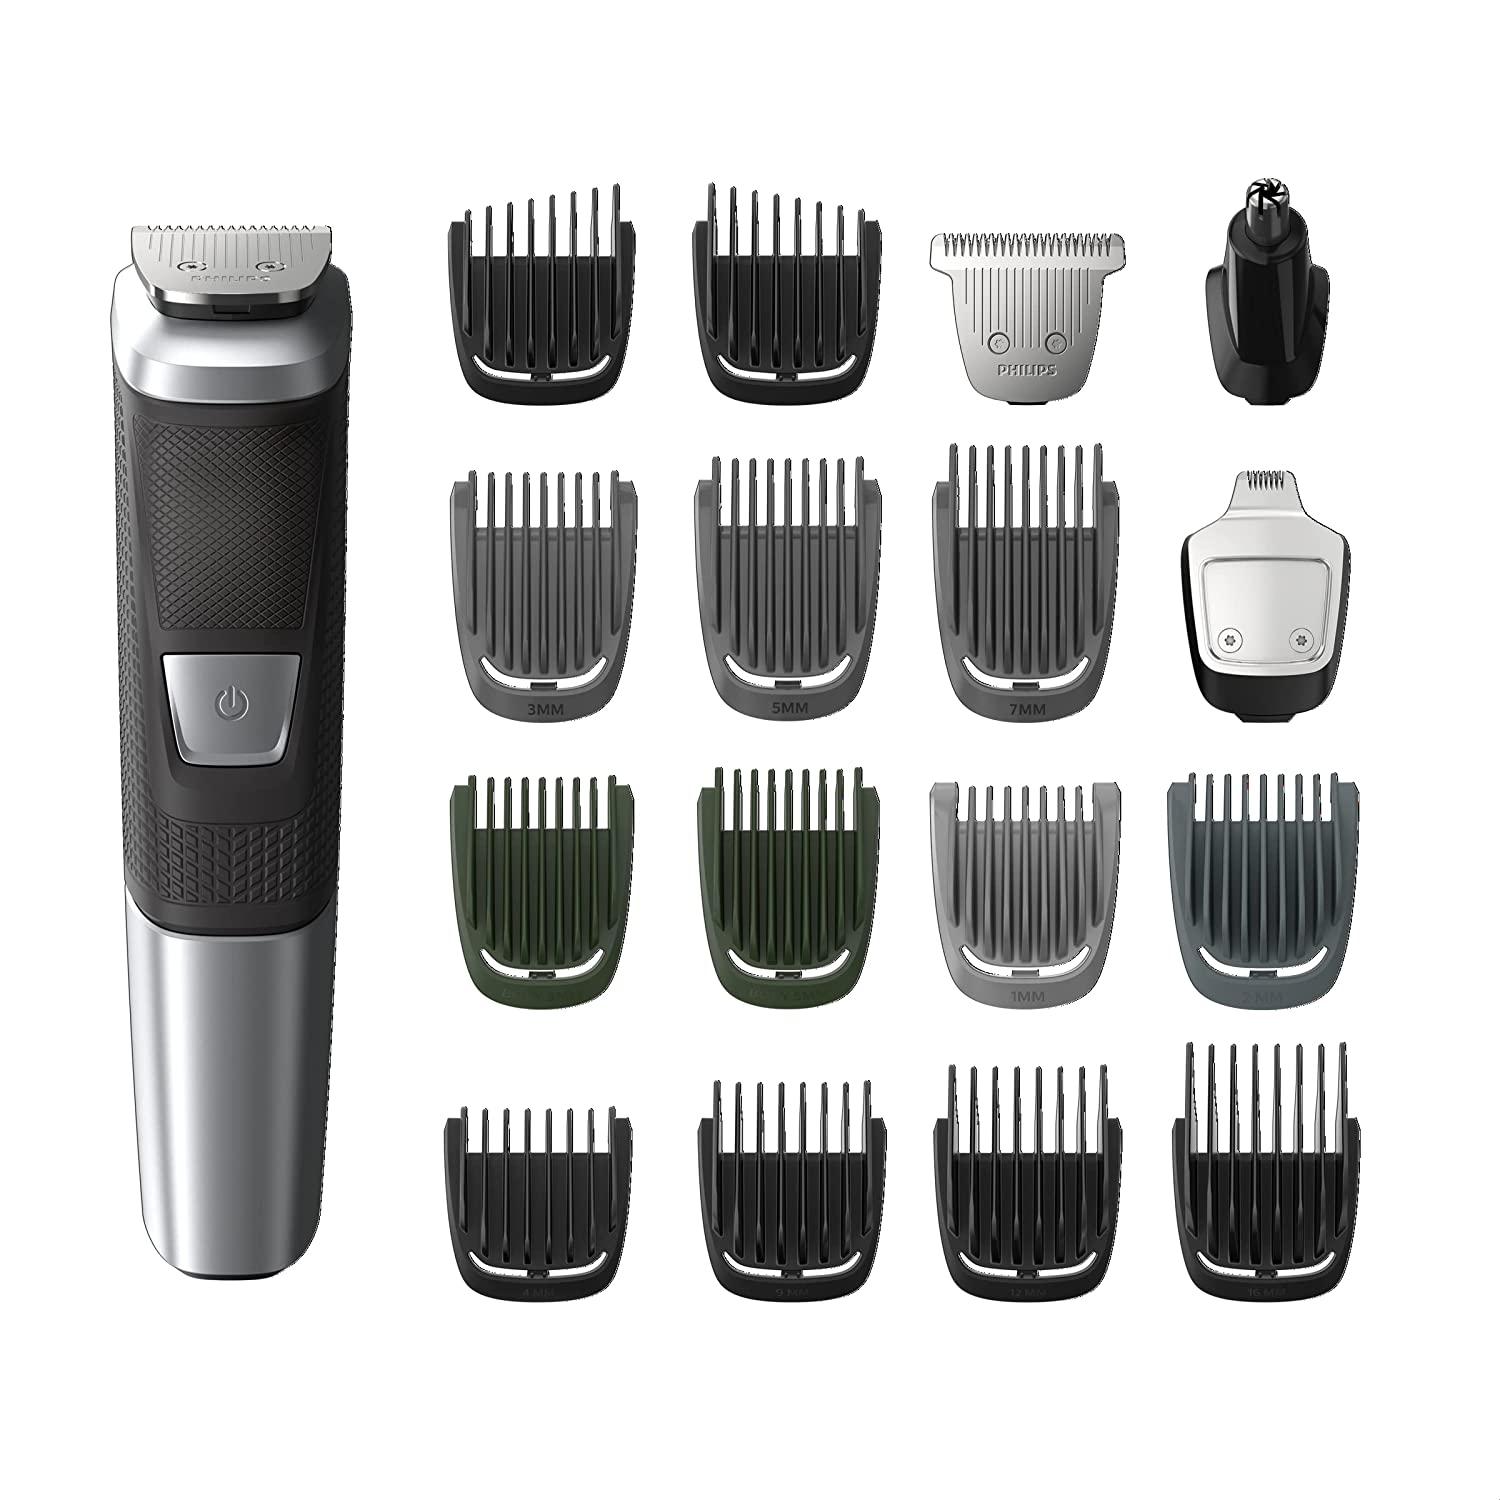 Philips Norelco Multigroom 5000 for $23.99